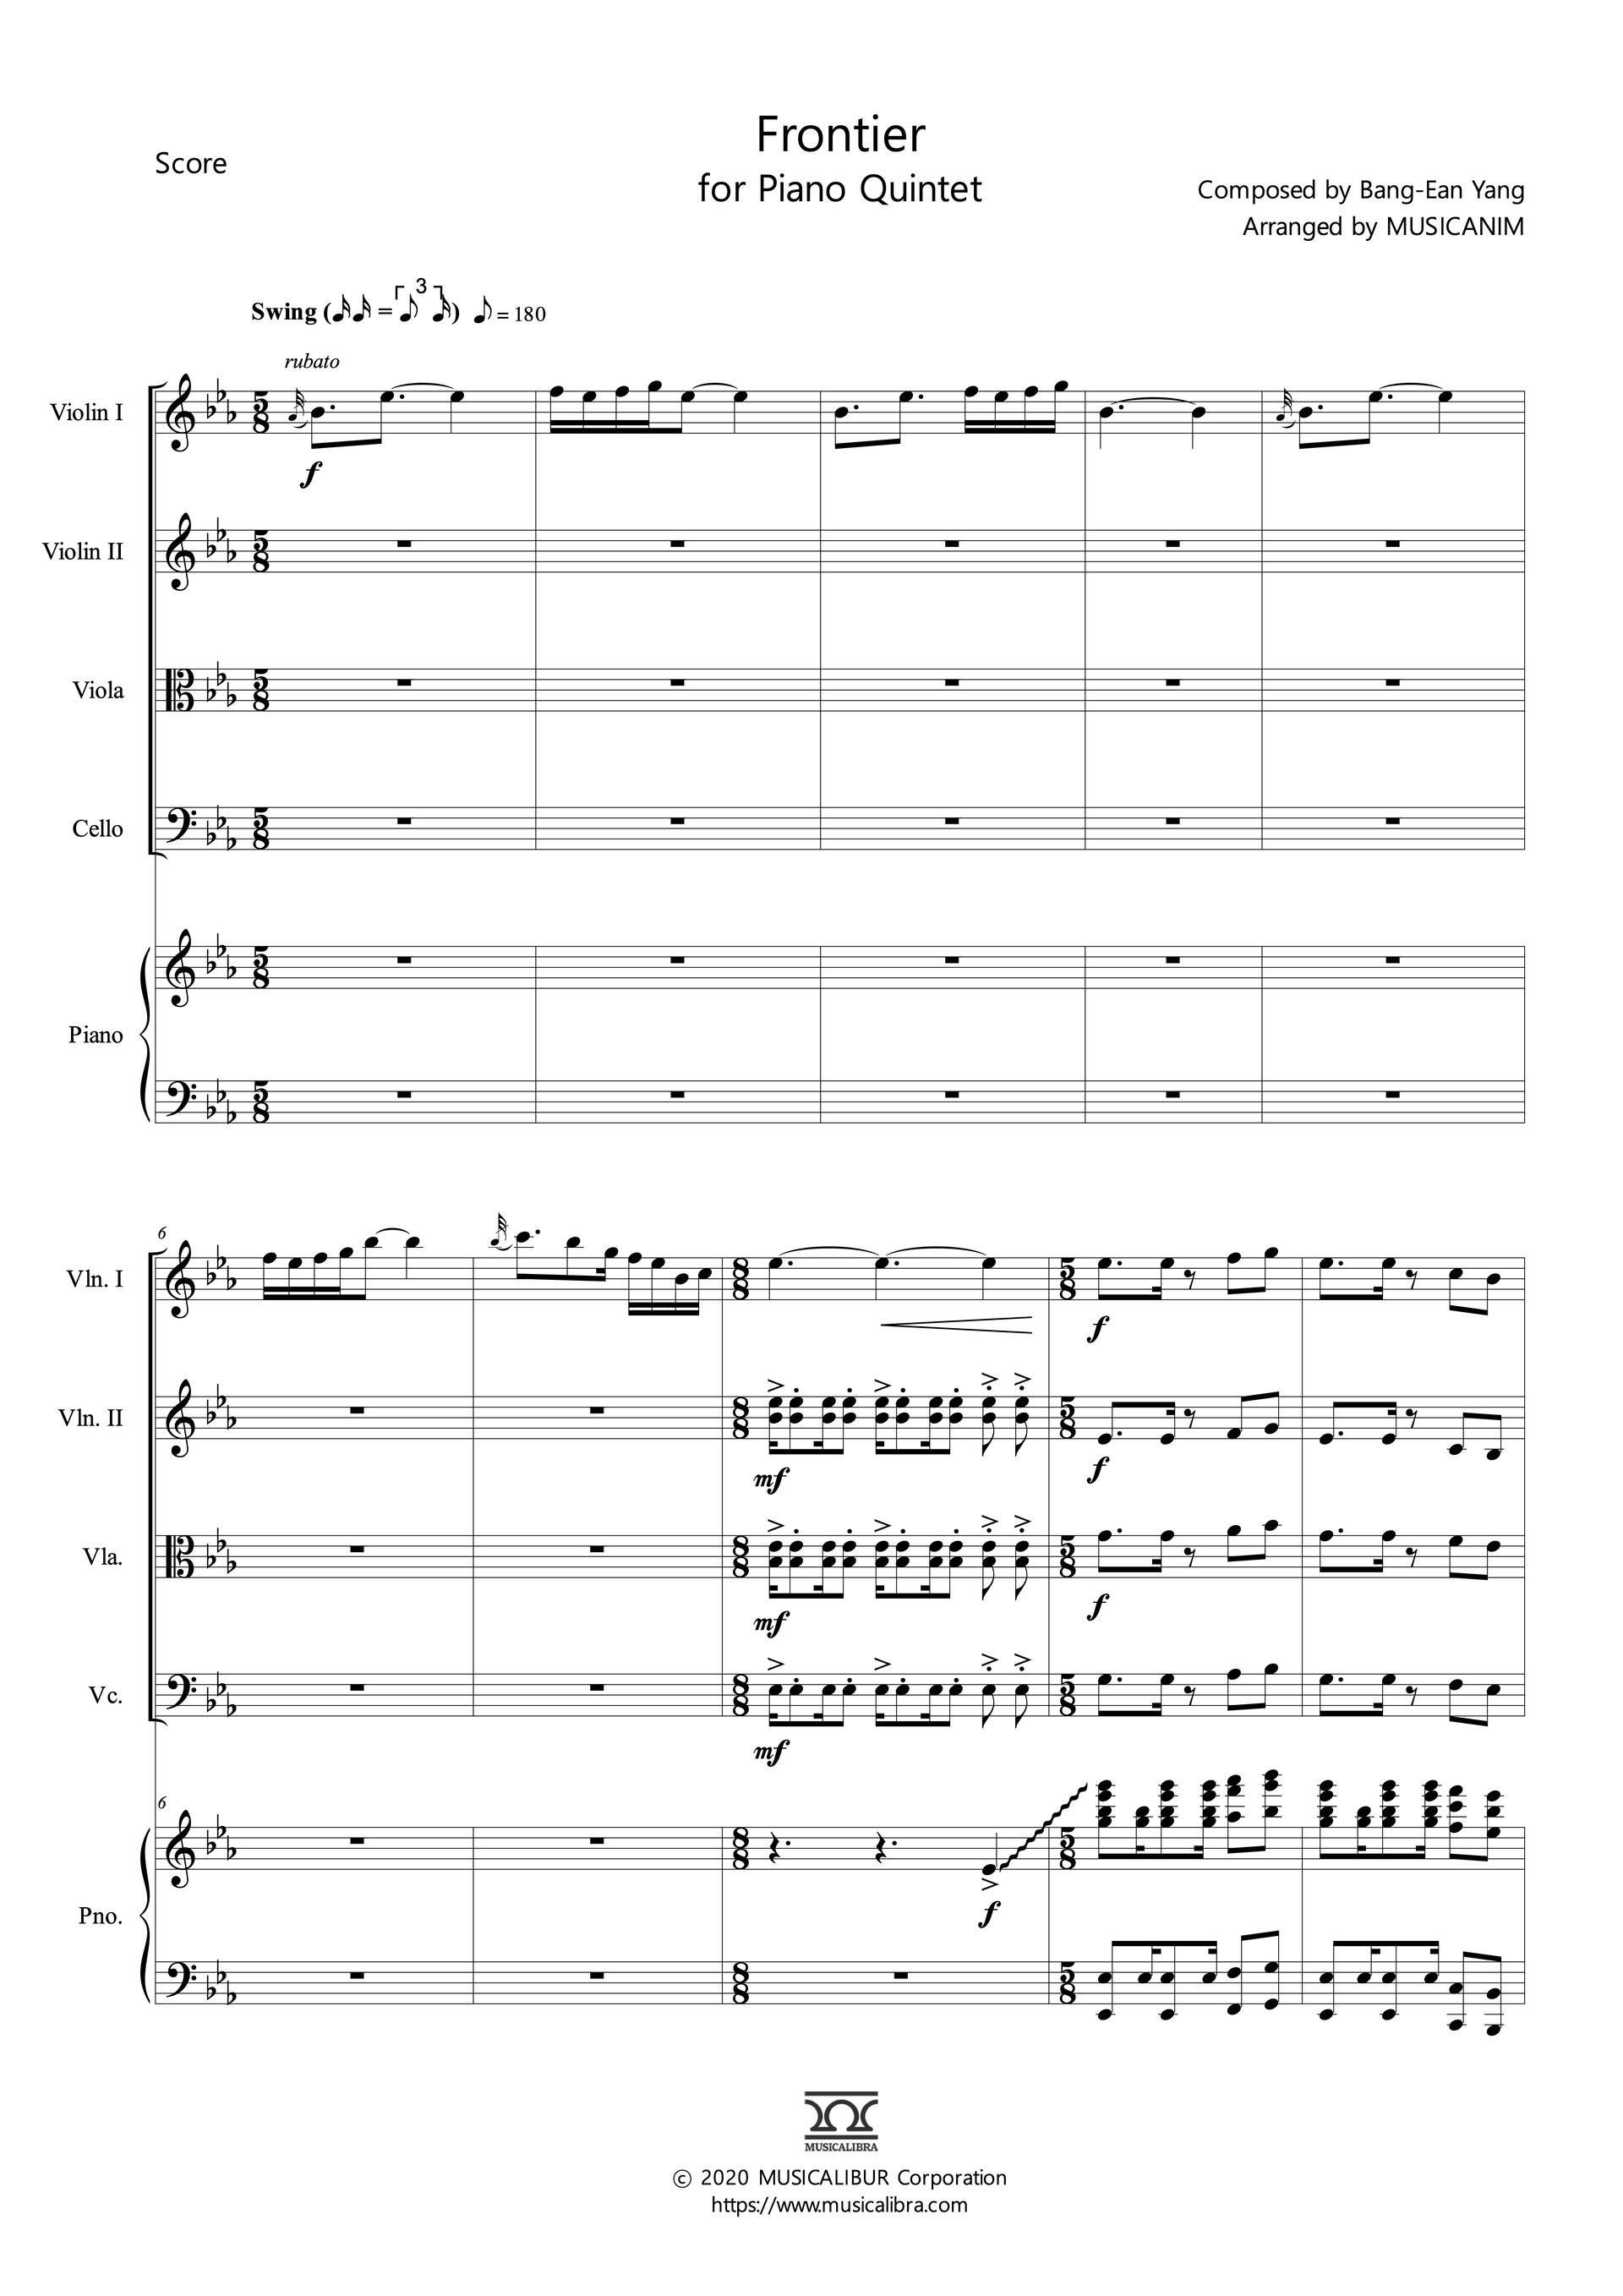 Sheet music of Frontier arranged for violins, viola, cello and piano quintet preview page 1